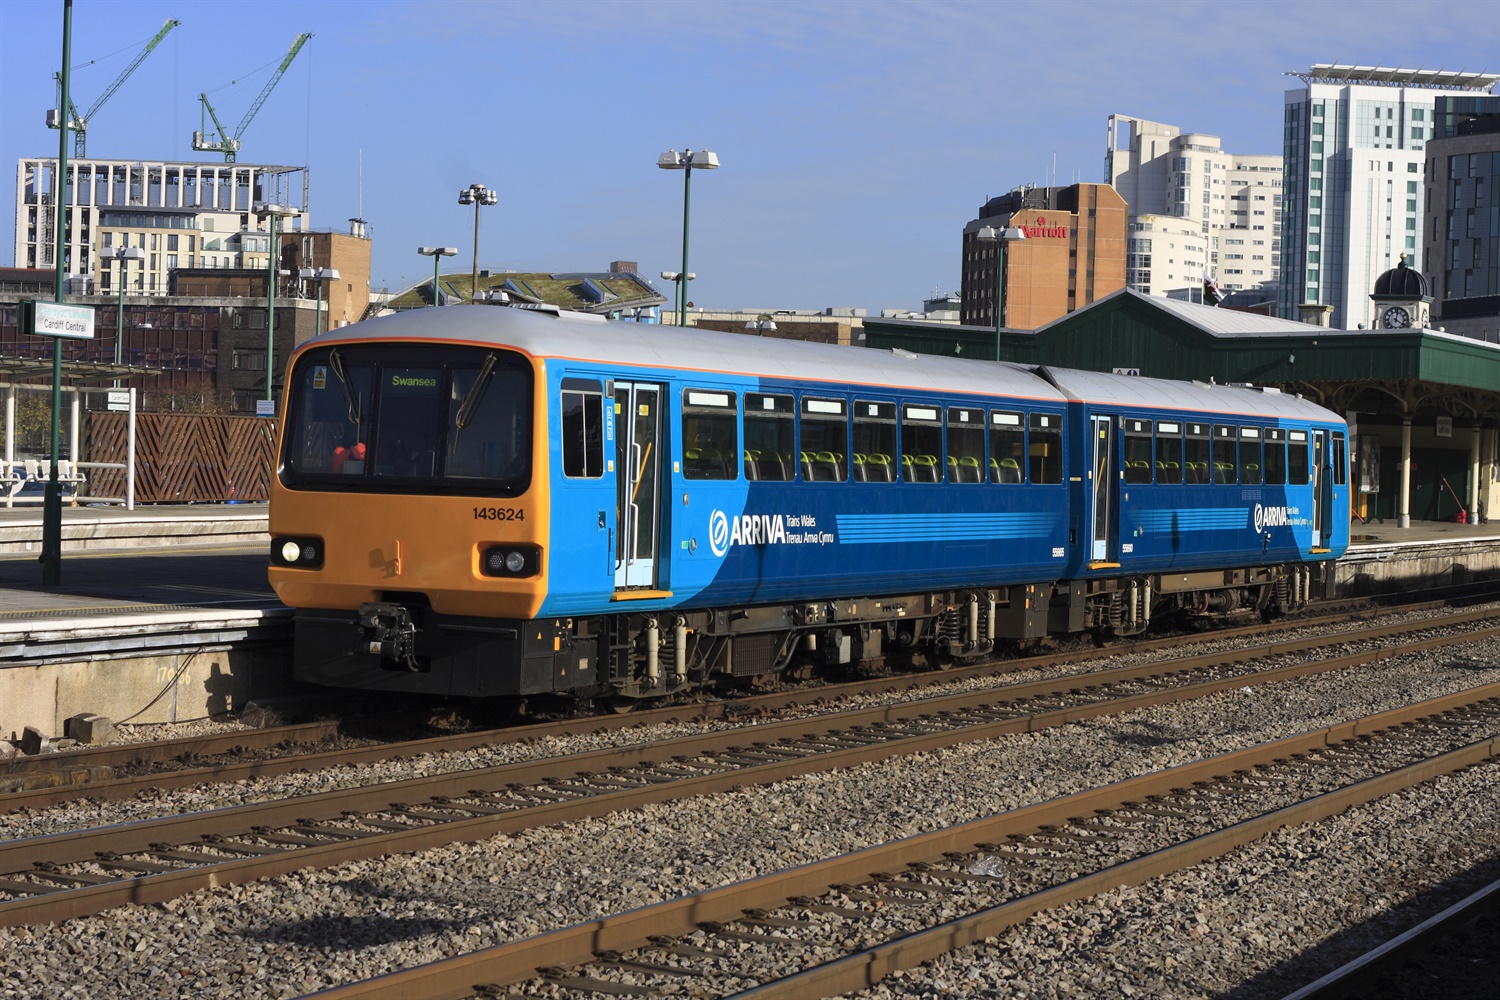 ATW pays out £2.4m in penalties for delayed and cancelled services